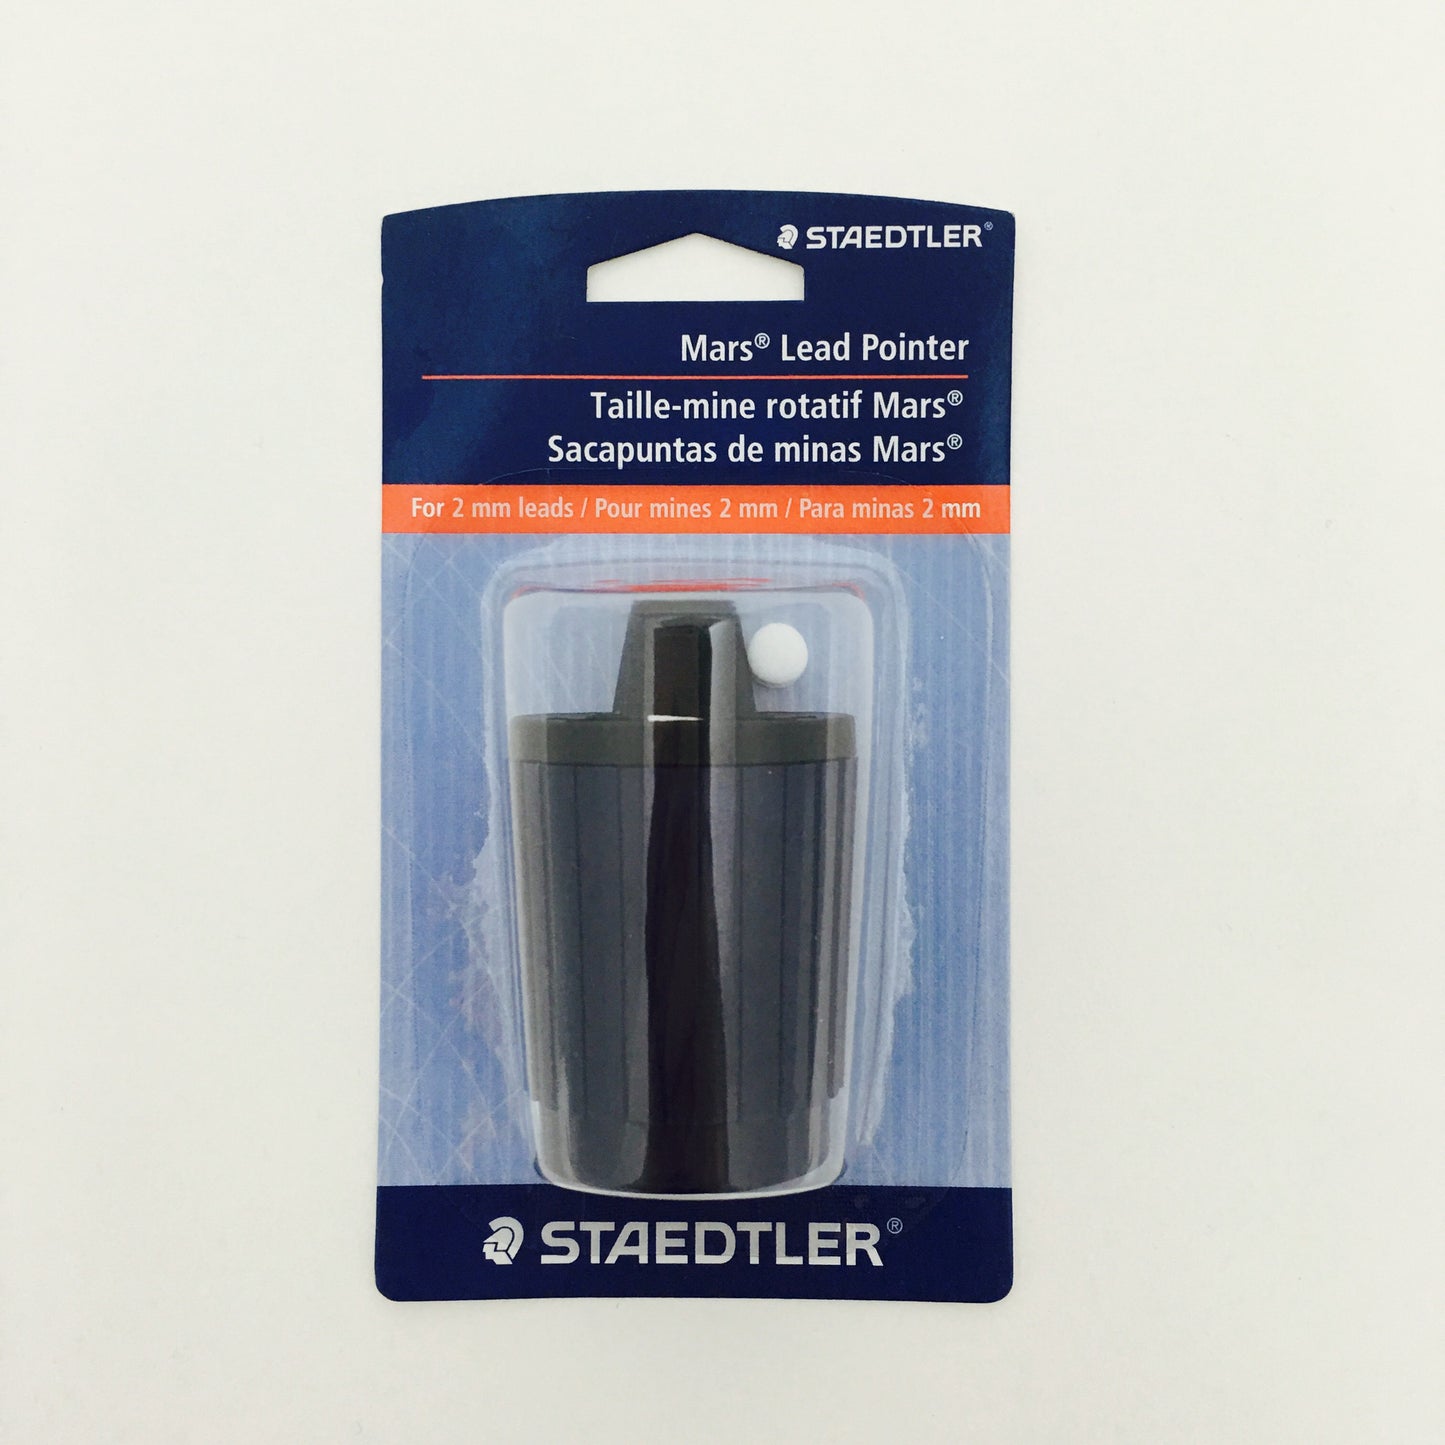 Staedtler Mars Lead Pointer - for 2mm Leads